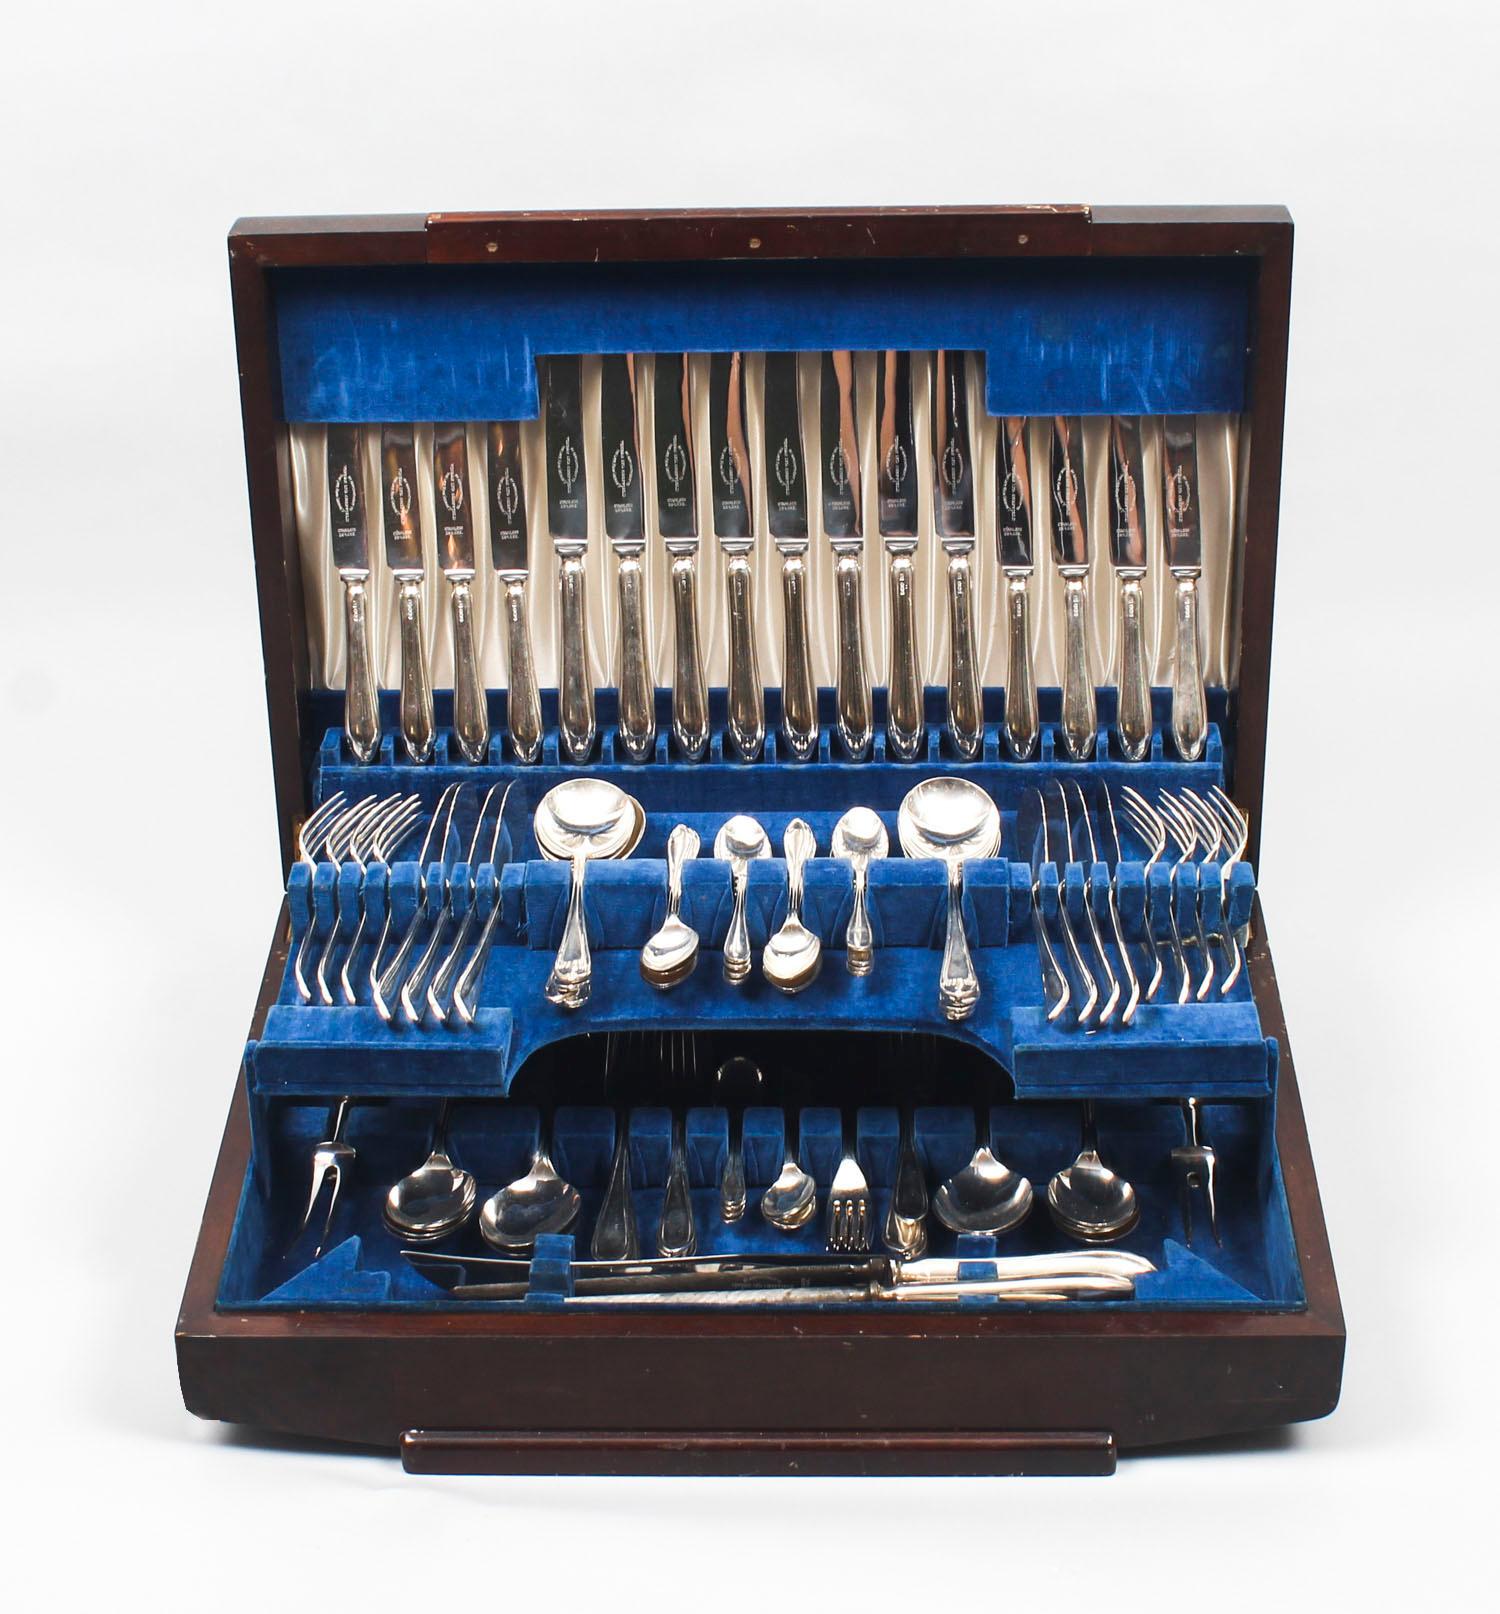 This is a wonderful 97 piece 8 place setting vintage sterling silver cutlery canteen in the original walnut case. The silver with hallmarks for Sheffield 1946 and the makers mark of the world renowned silversmith, Viners, in the elegant pointed